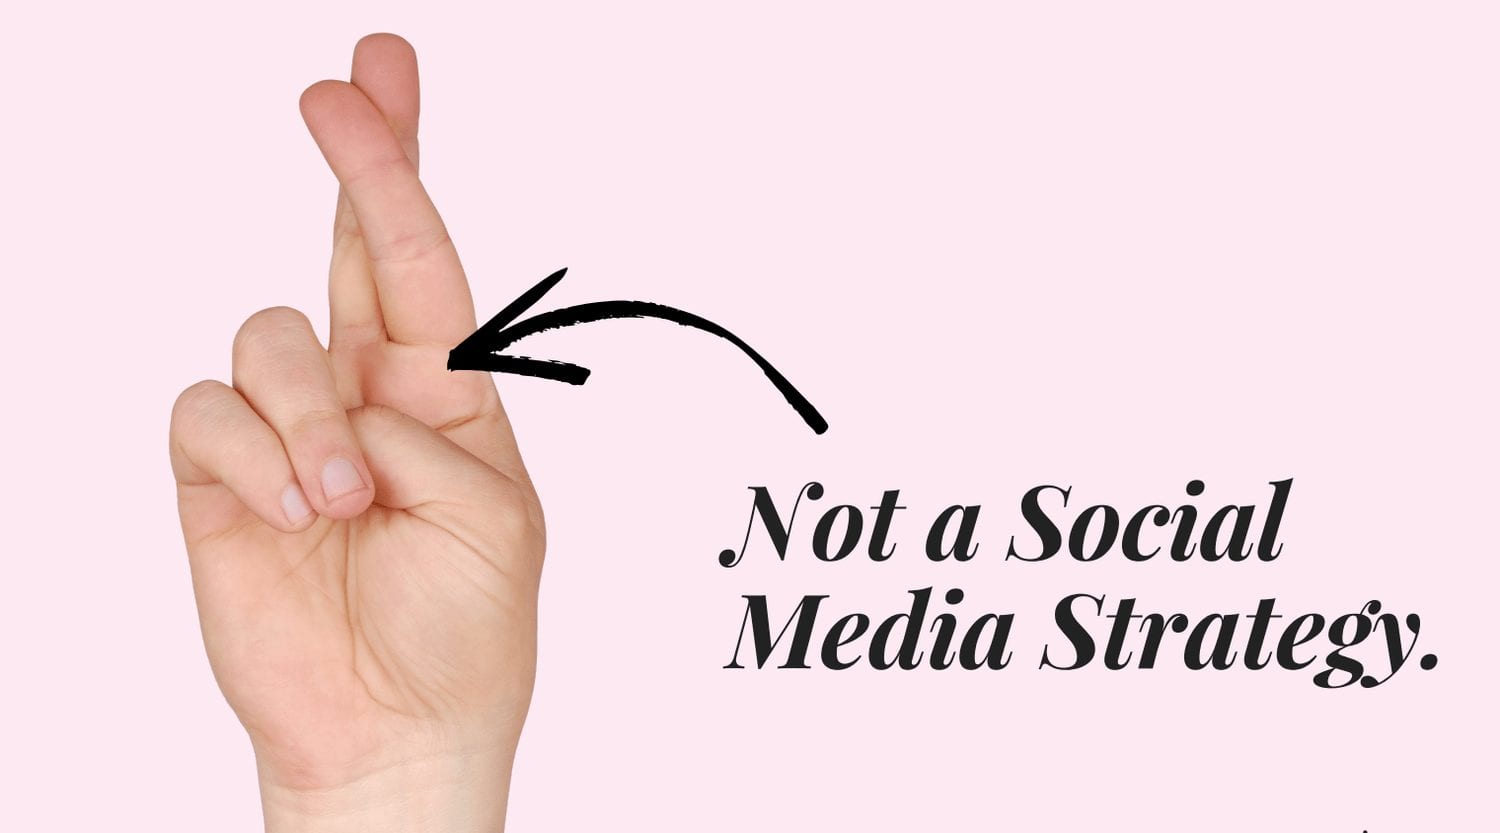 Crossing your fingers is not a social media strategy